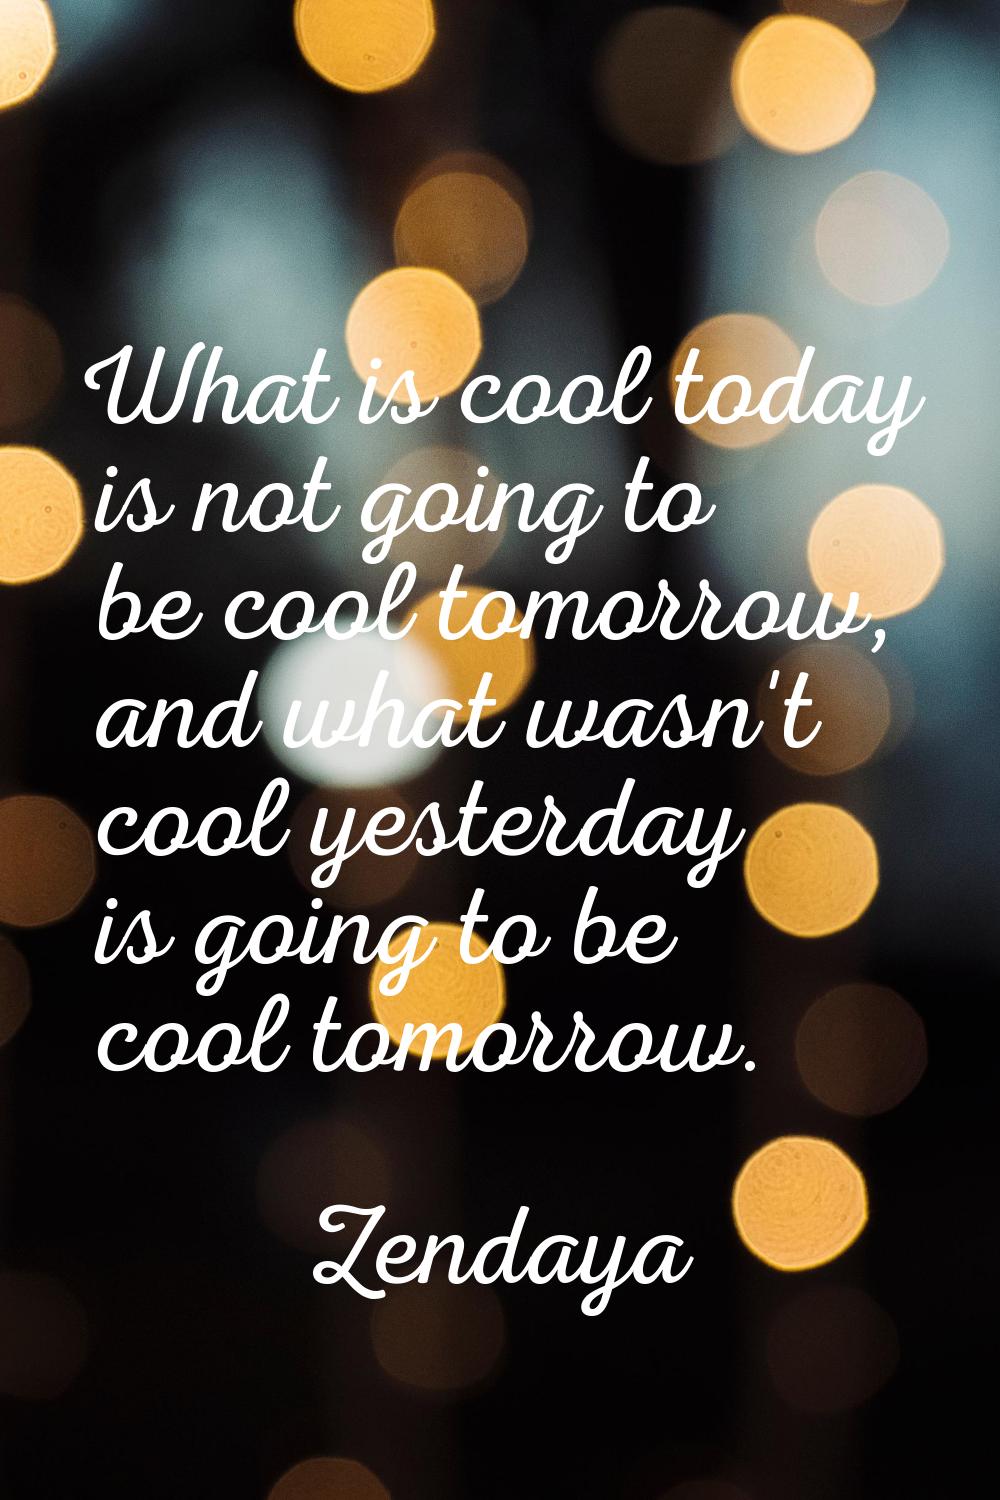 What is cool today is not going to be cool tomorrow, and what wasn't cool yesterday is going to be 